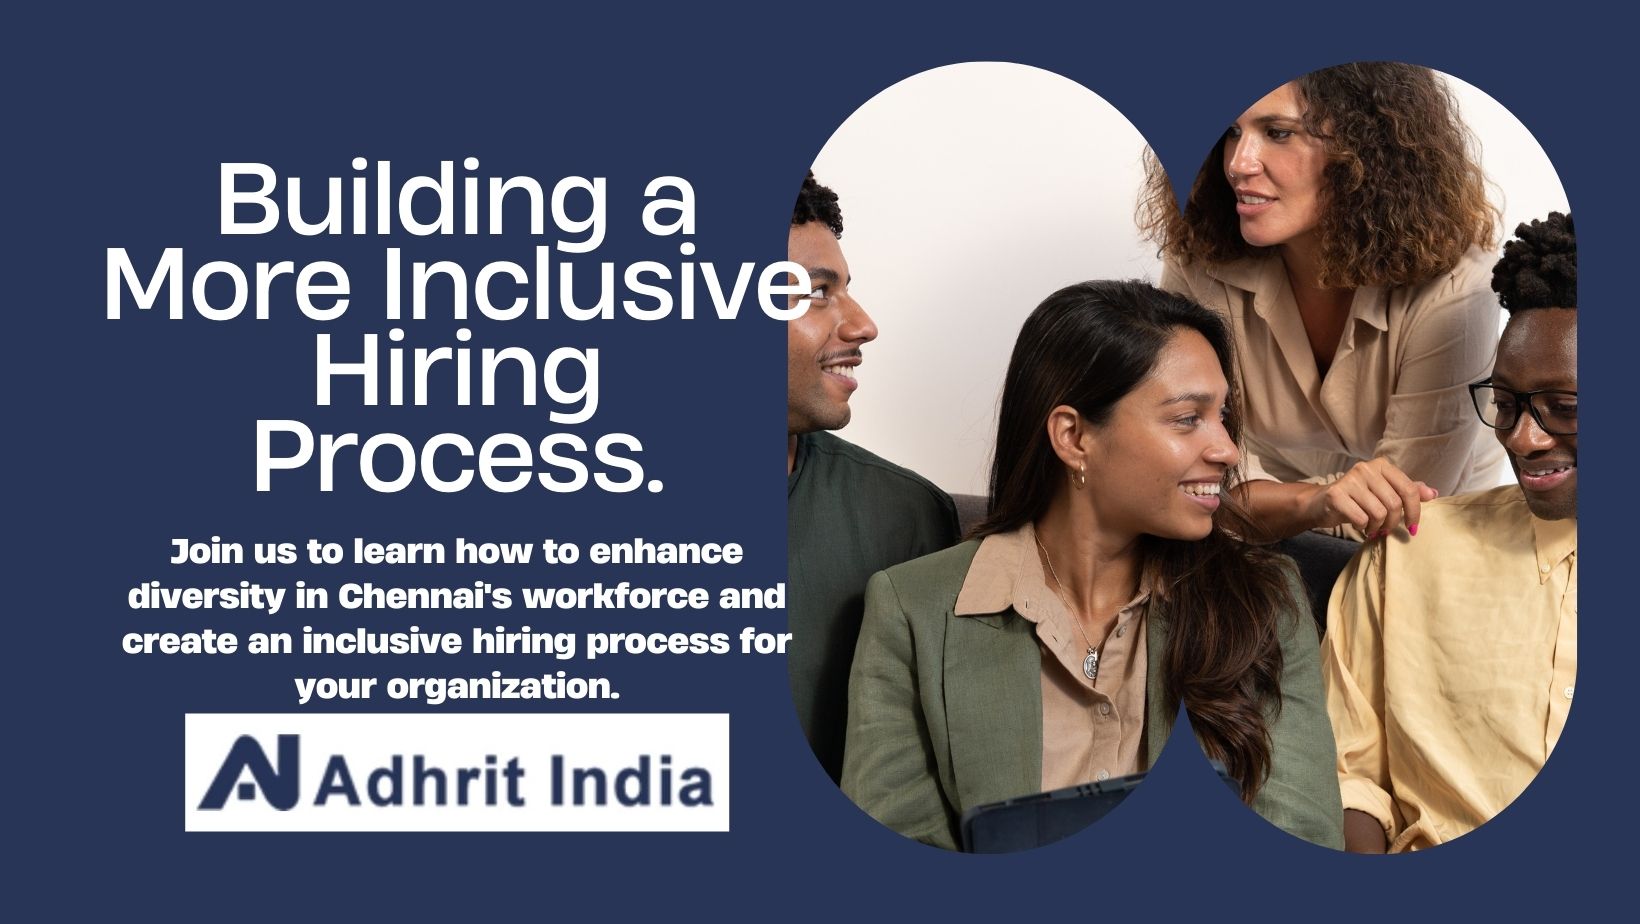 Diversity and Inclusion in Chennai's Workforce: Building a More Inclusive Hiring Process